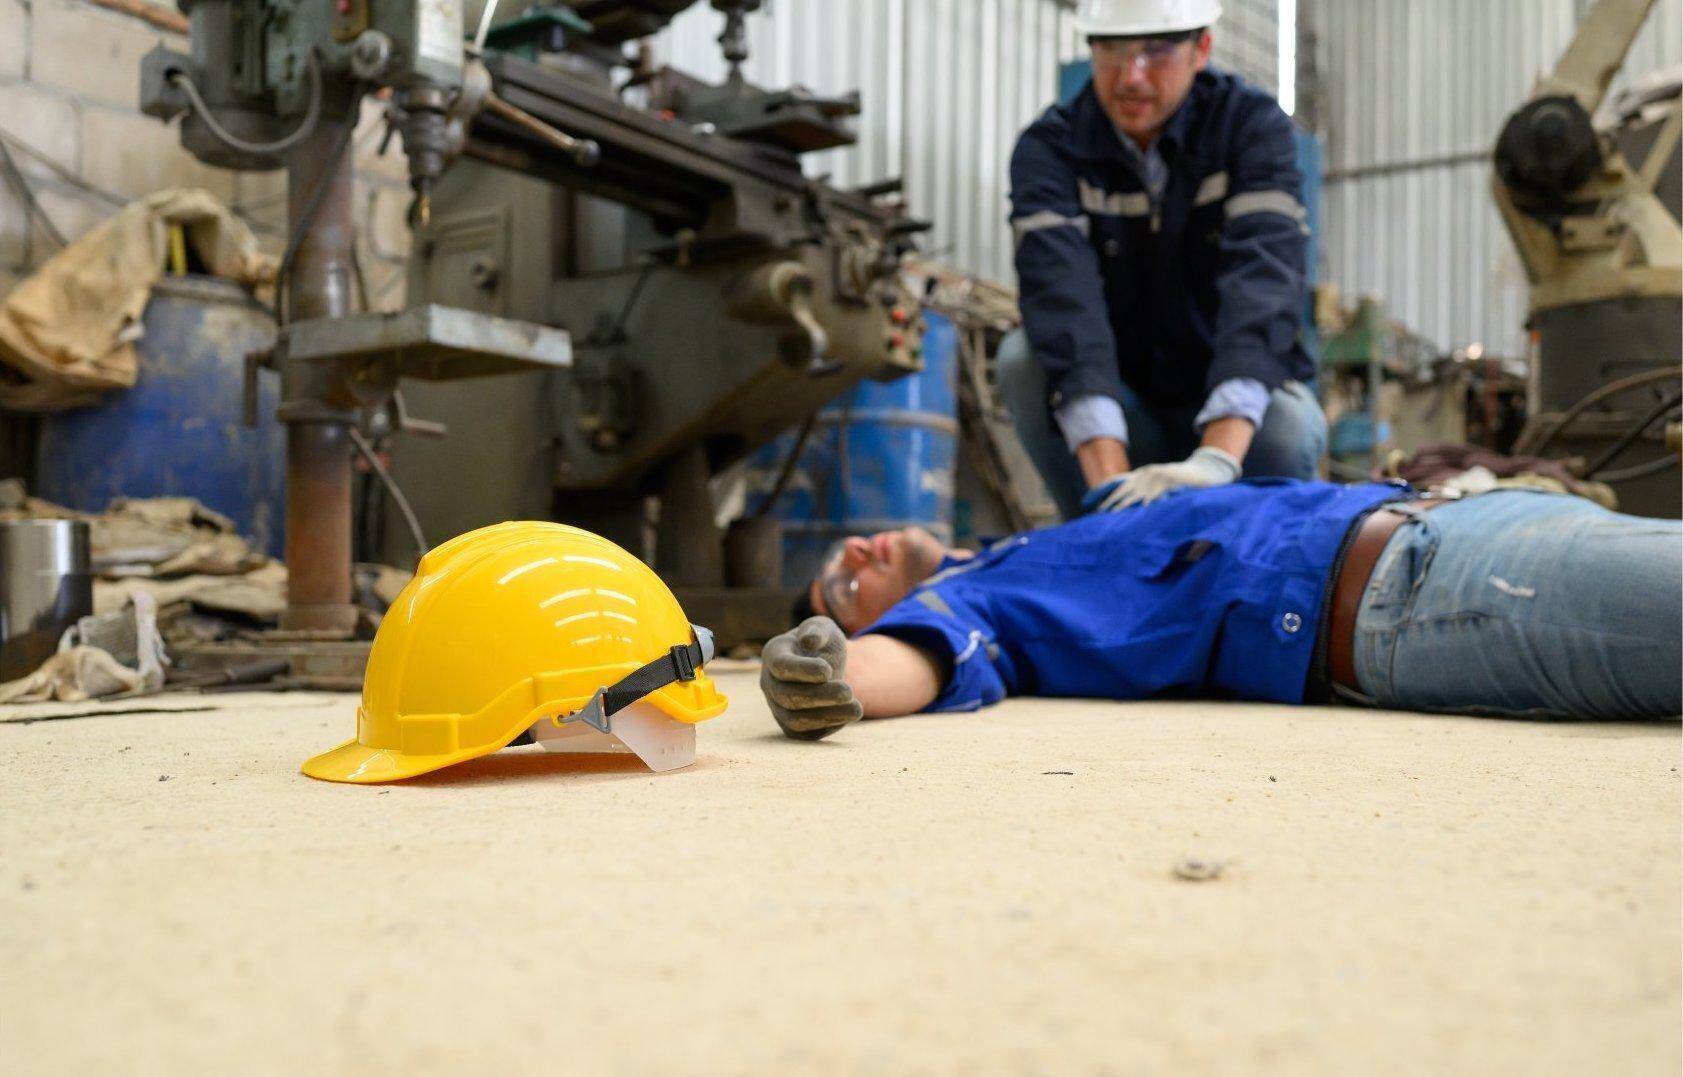 An unconscious man who has been injured on the job who will file for workers compensation in Lilburn, Georgia